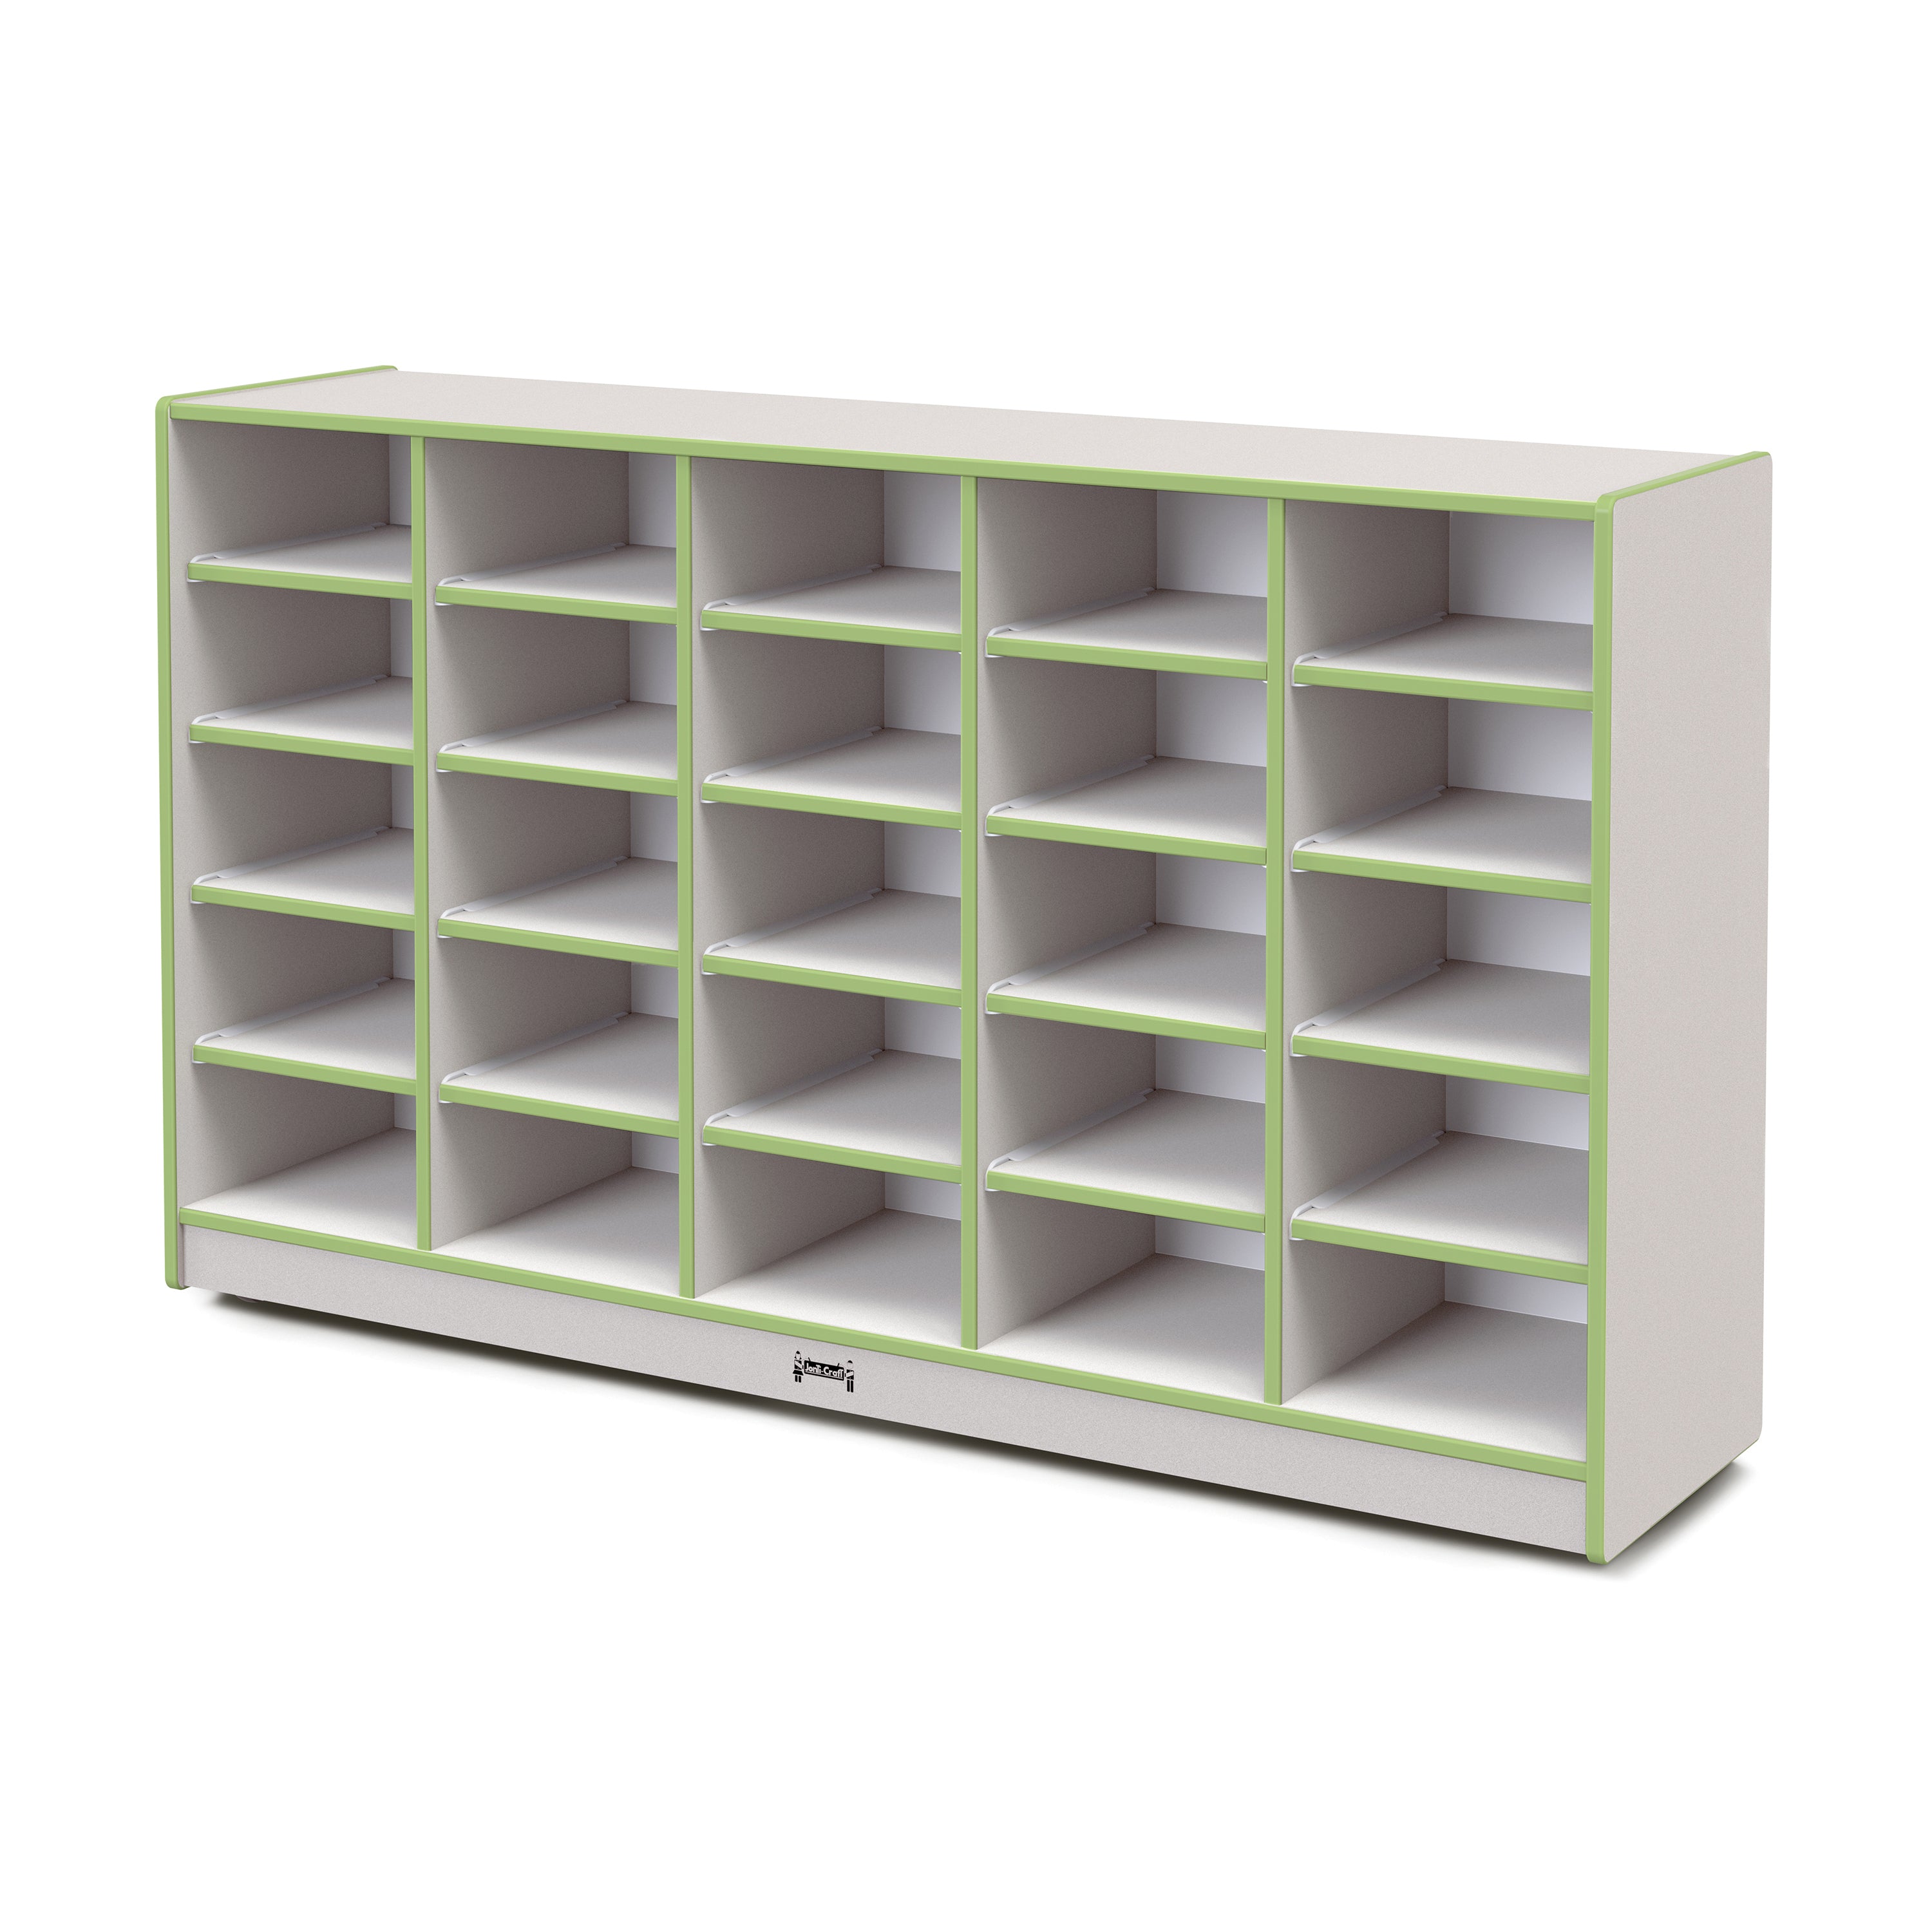 4025JCWW130, Rainbow Accents 25 Tub Mobile Storage - without Tubs - Key Lime Green